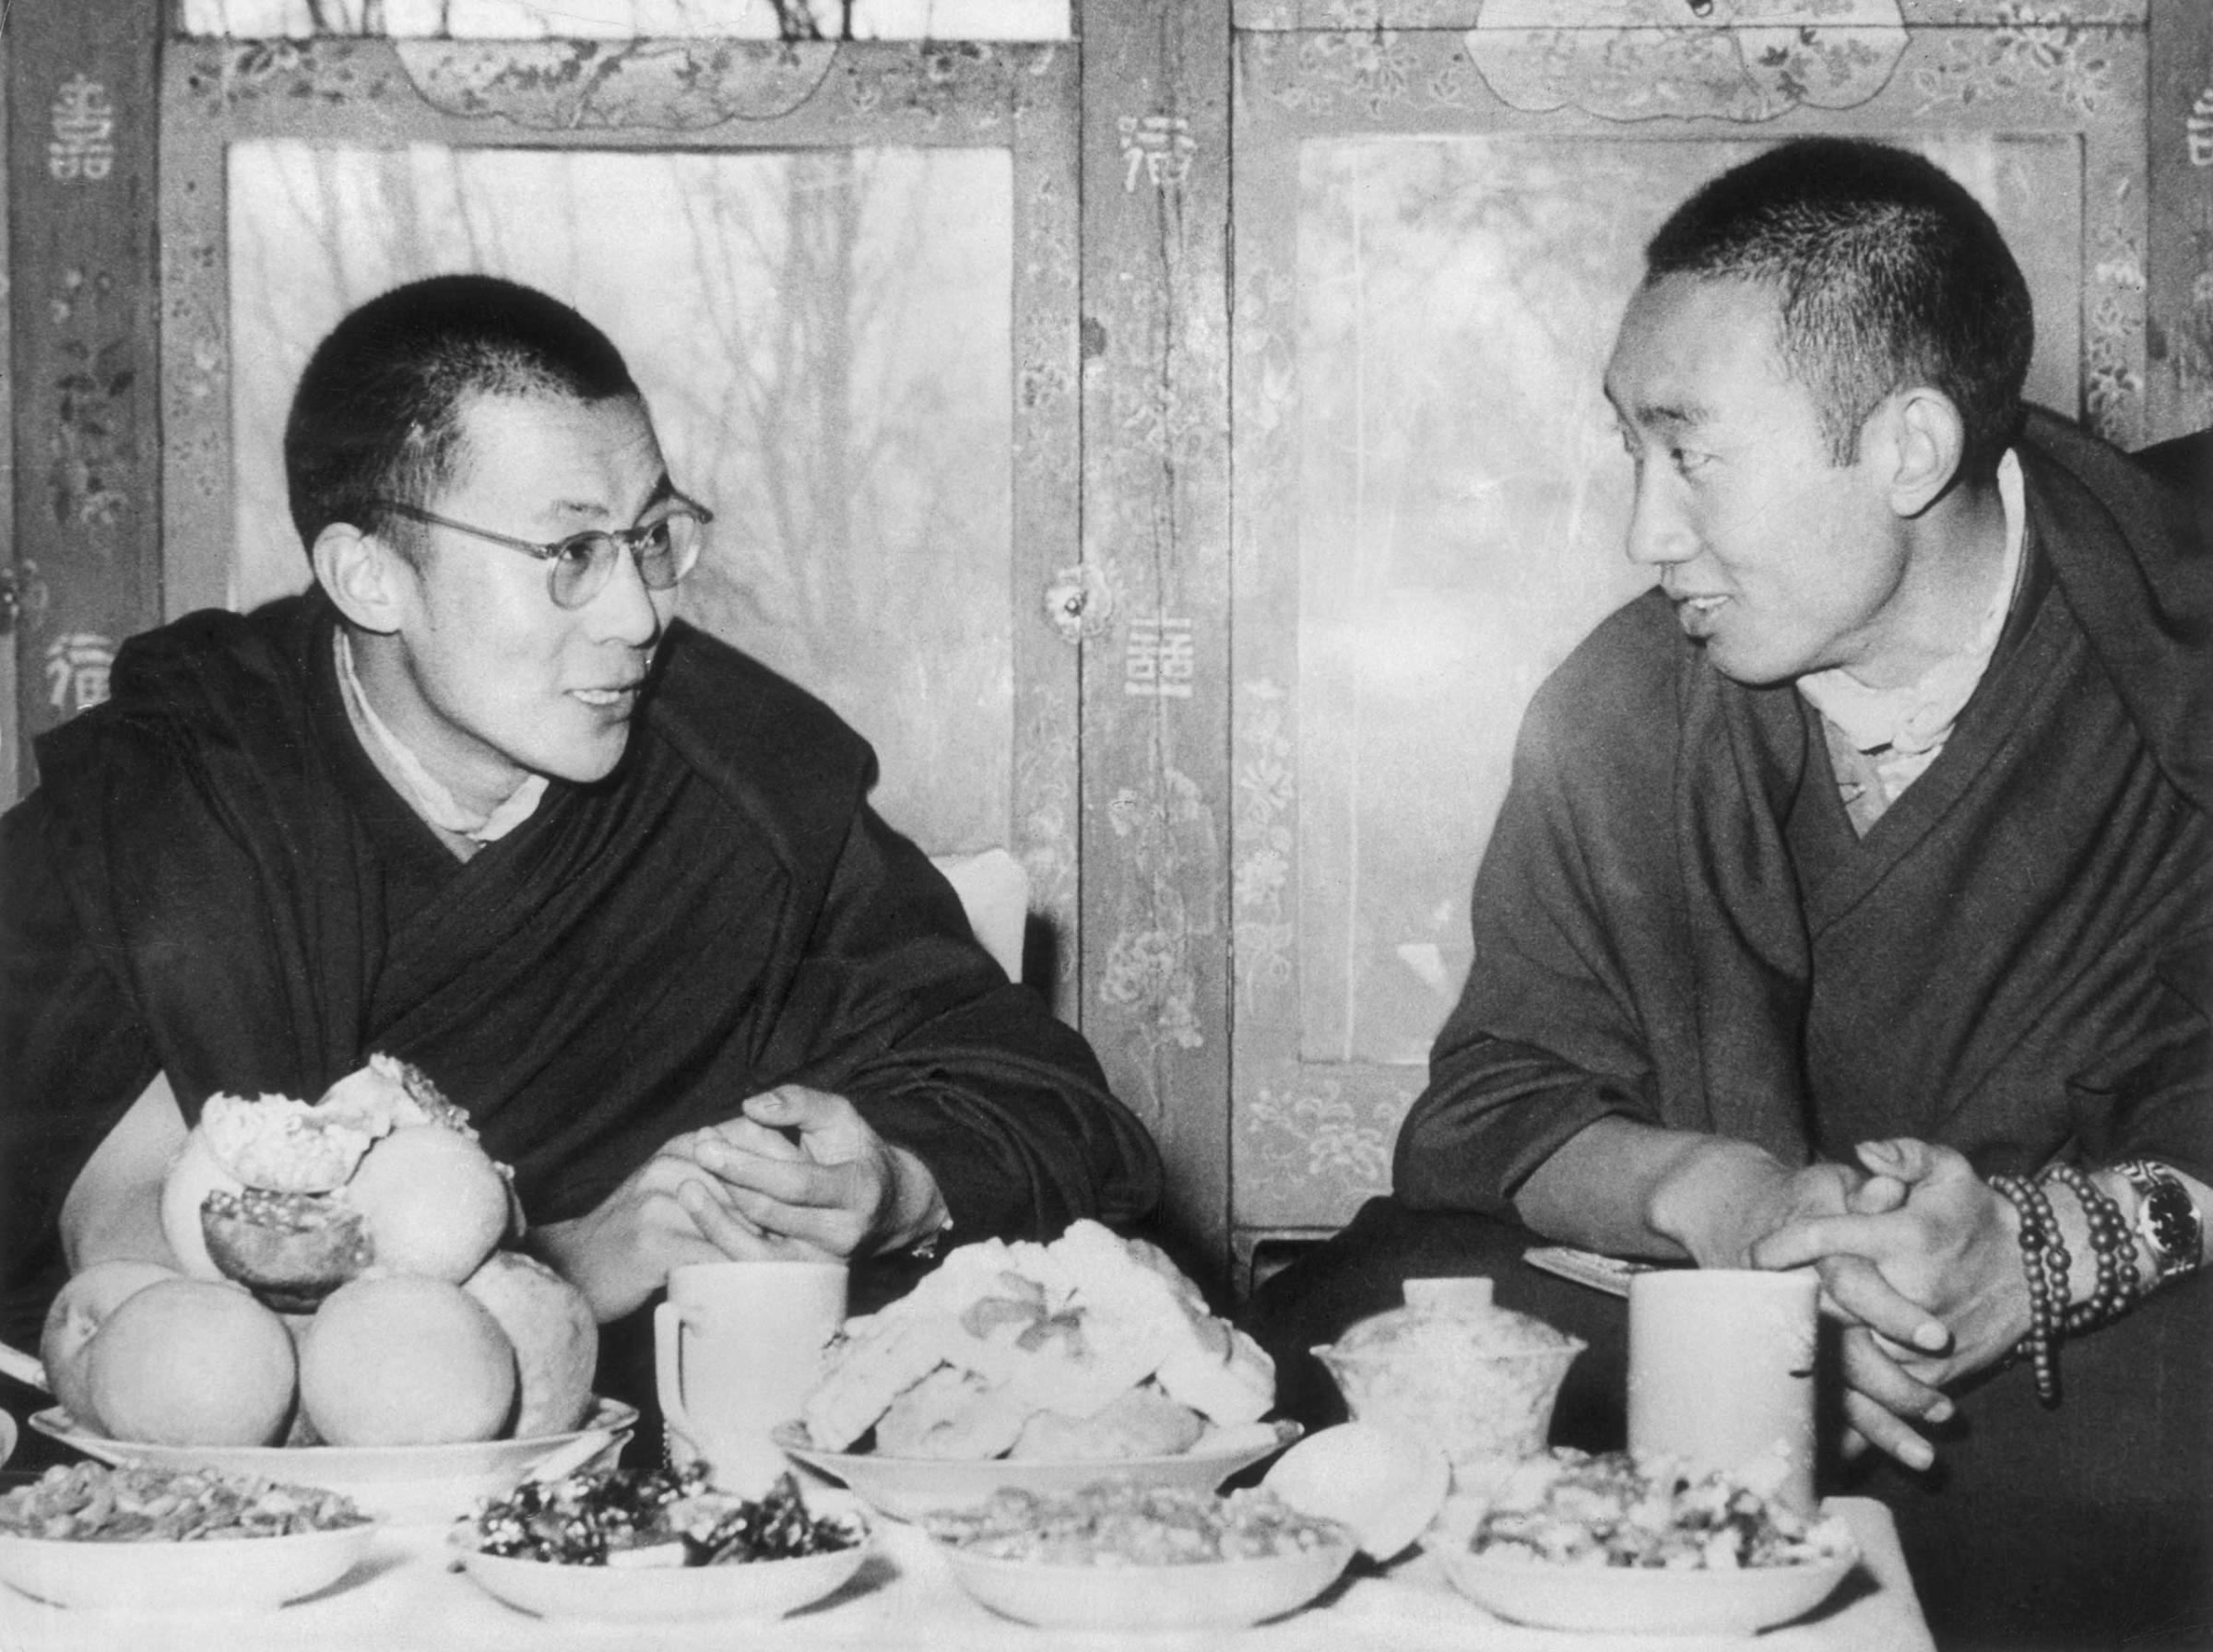 His Holiness the Dalai Lama and the Panchen Lama, second in rank as spiritual leader, in Tibet, in 1954.